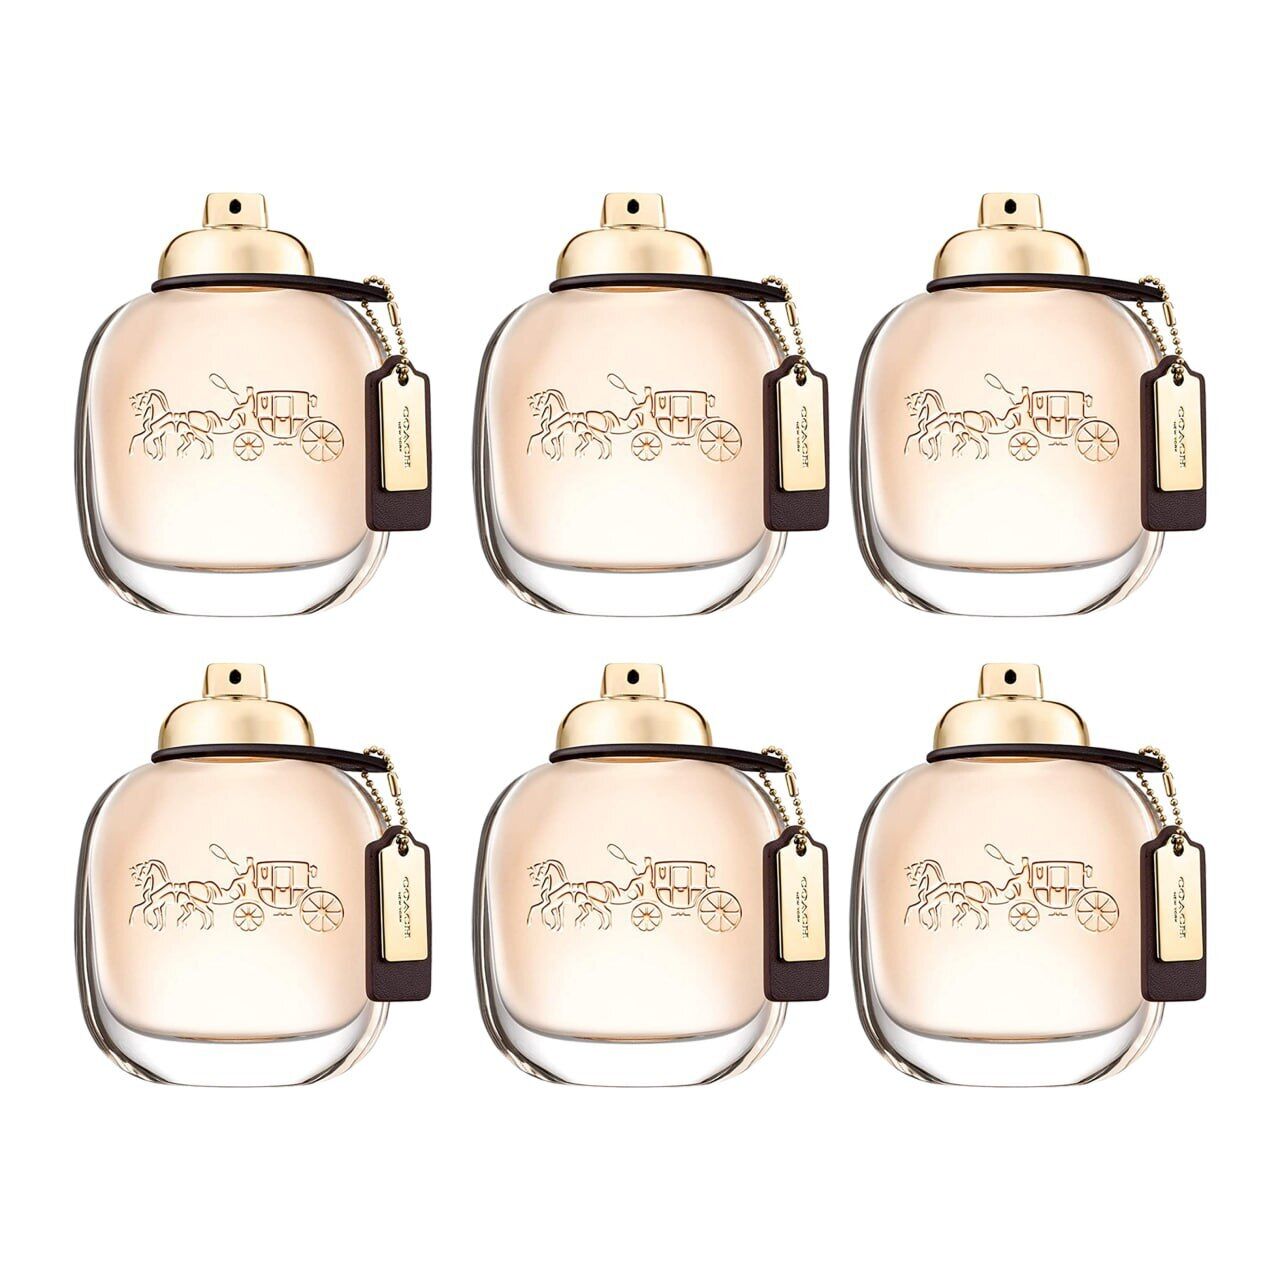 Pack of 6 New Coach New York Perfume by Coach 3.0 oz